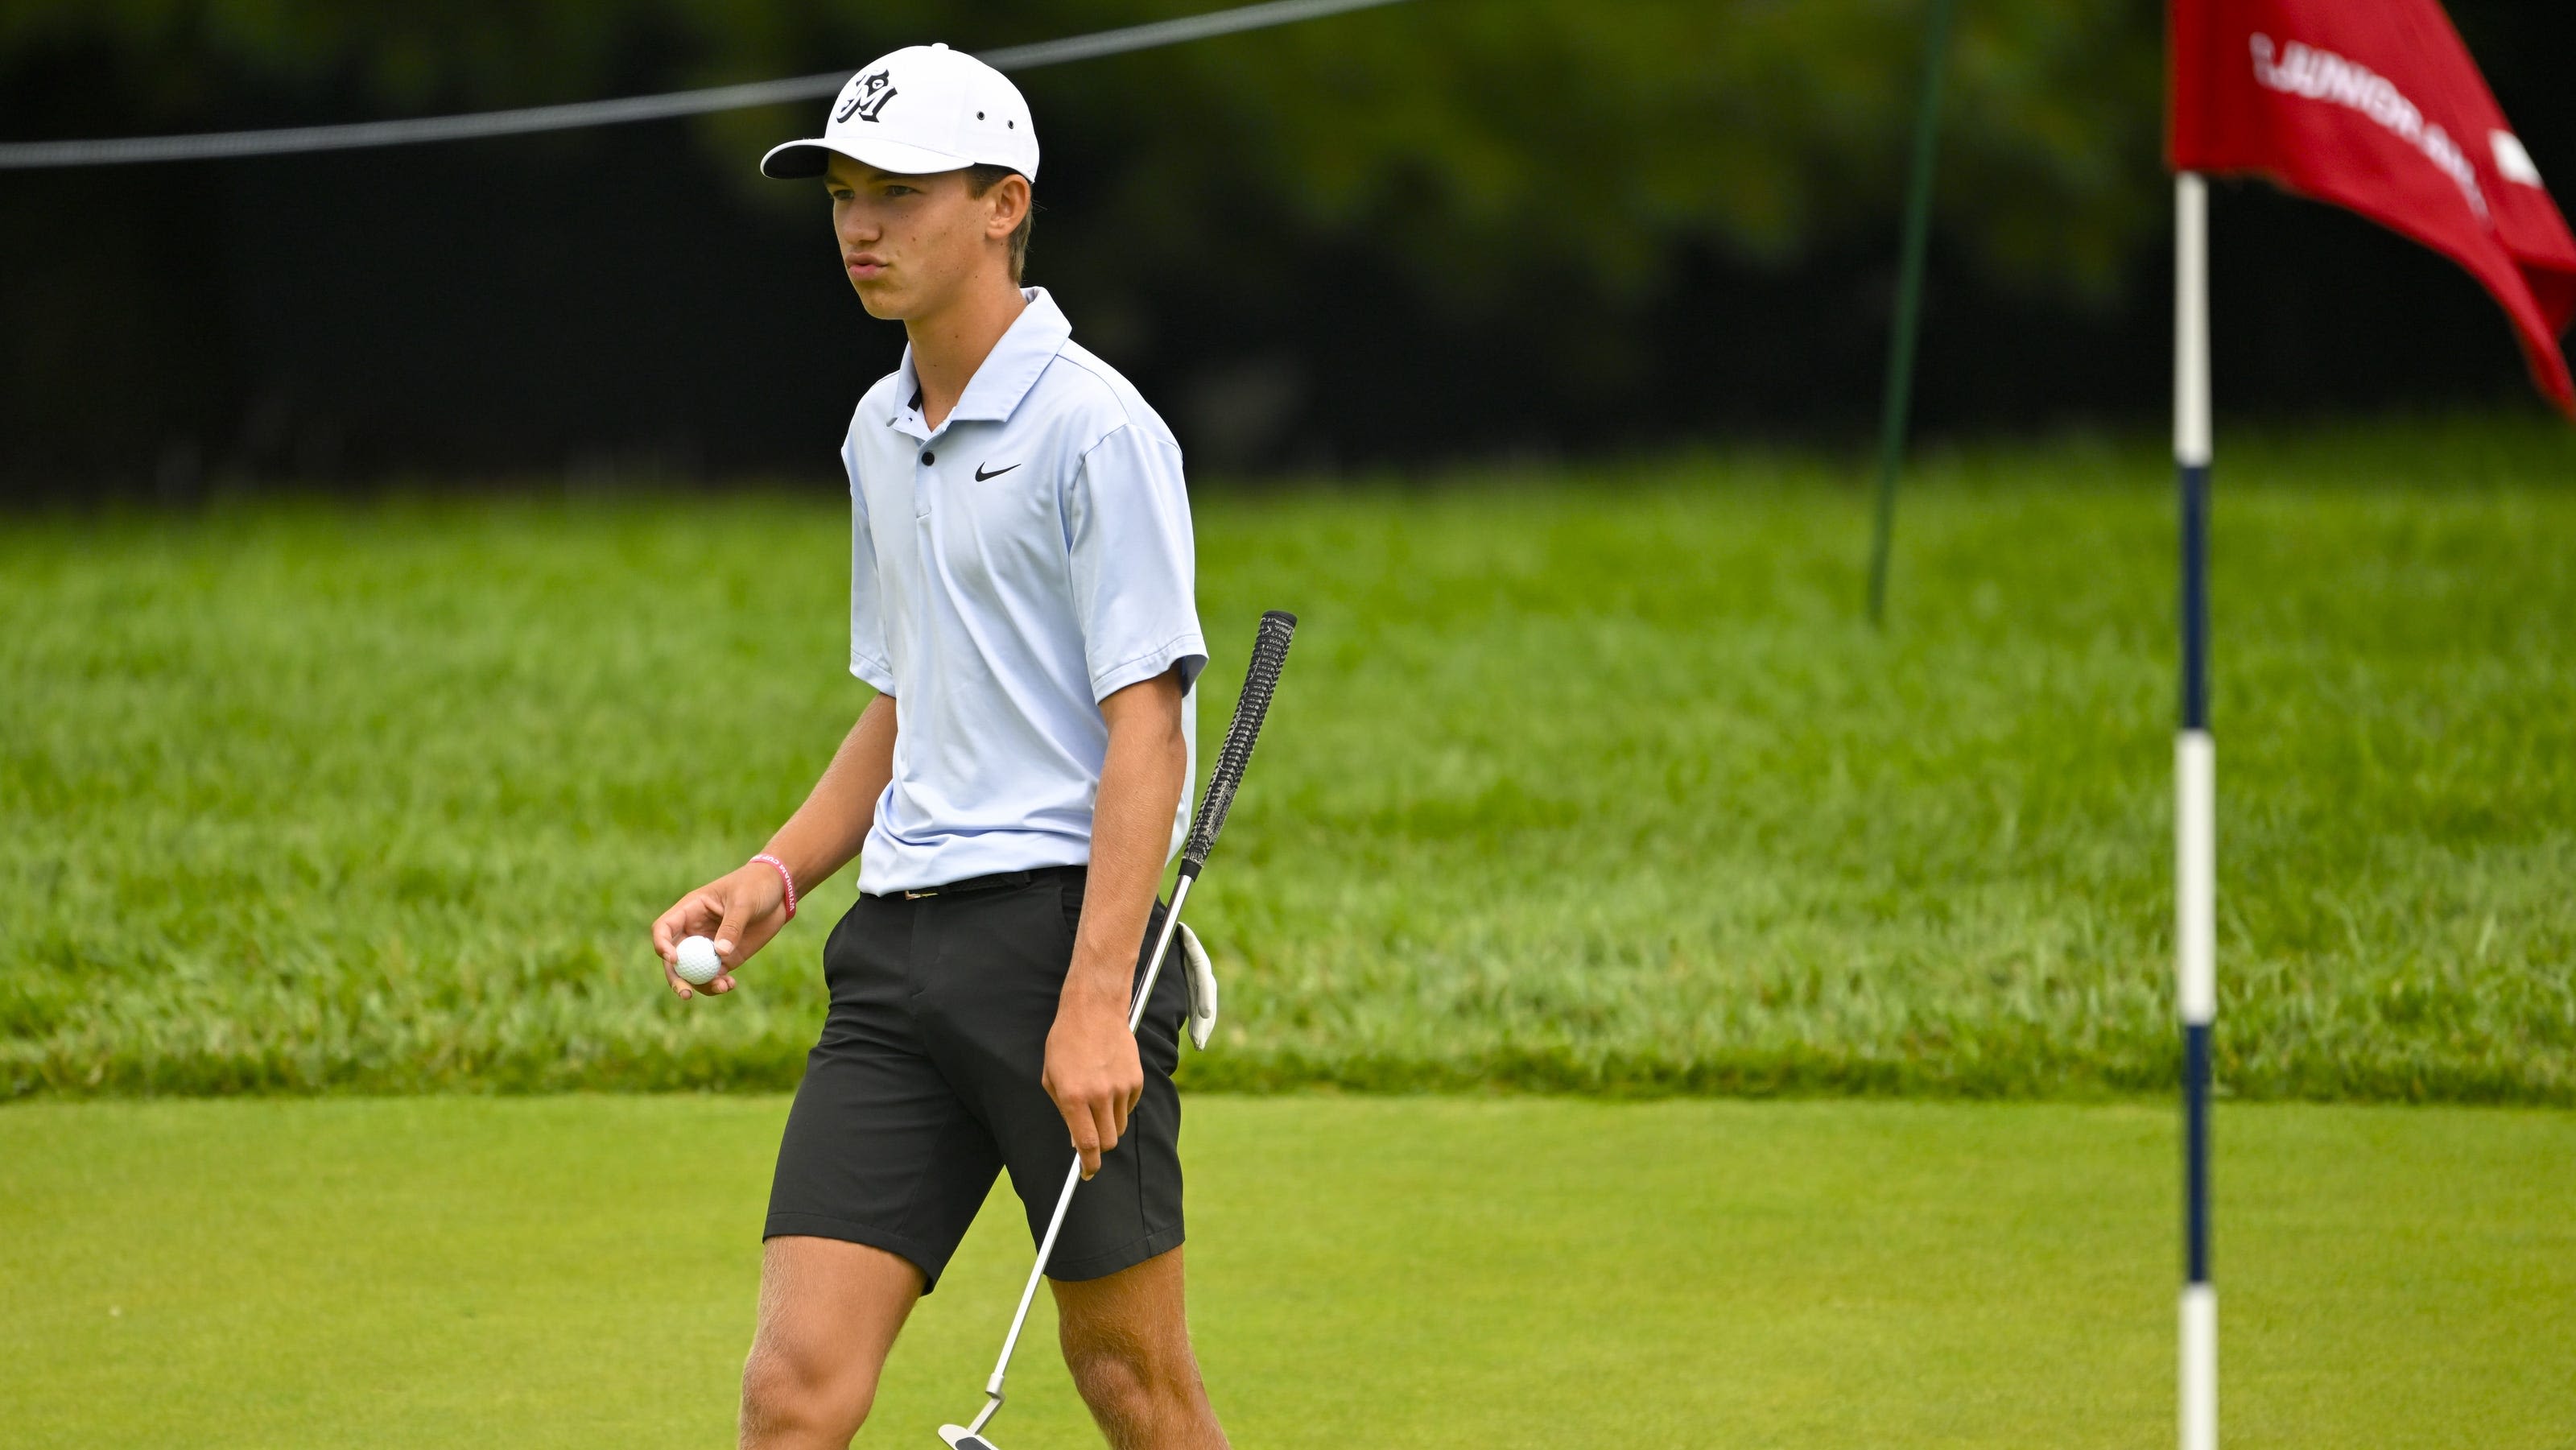 Miles Russell makes fast work of his first-round match in U.S. Junior Amateur at Oakland Hills